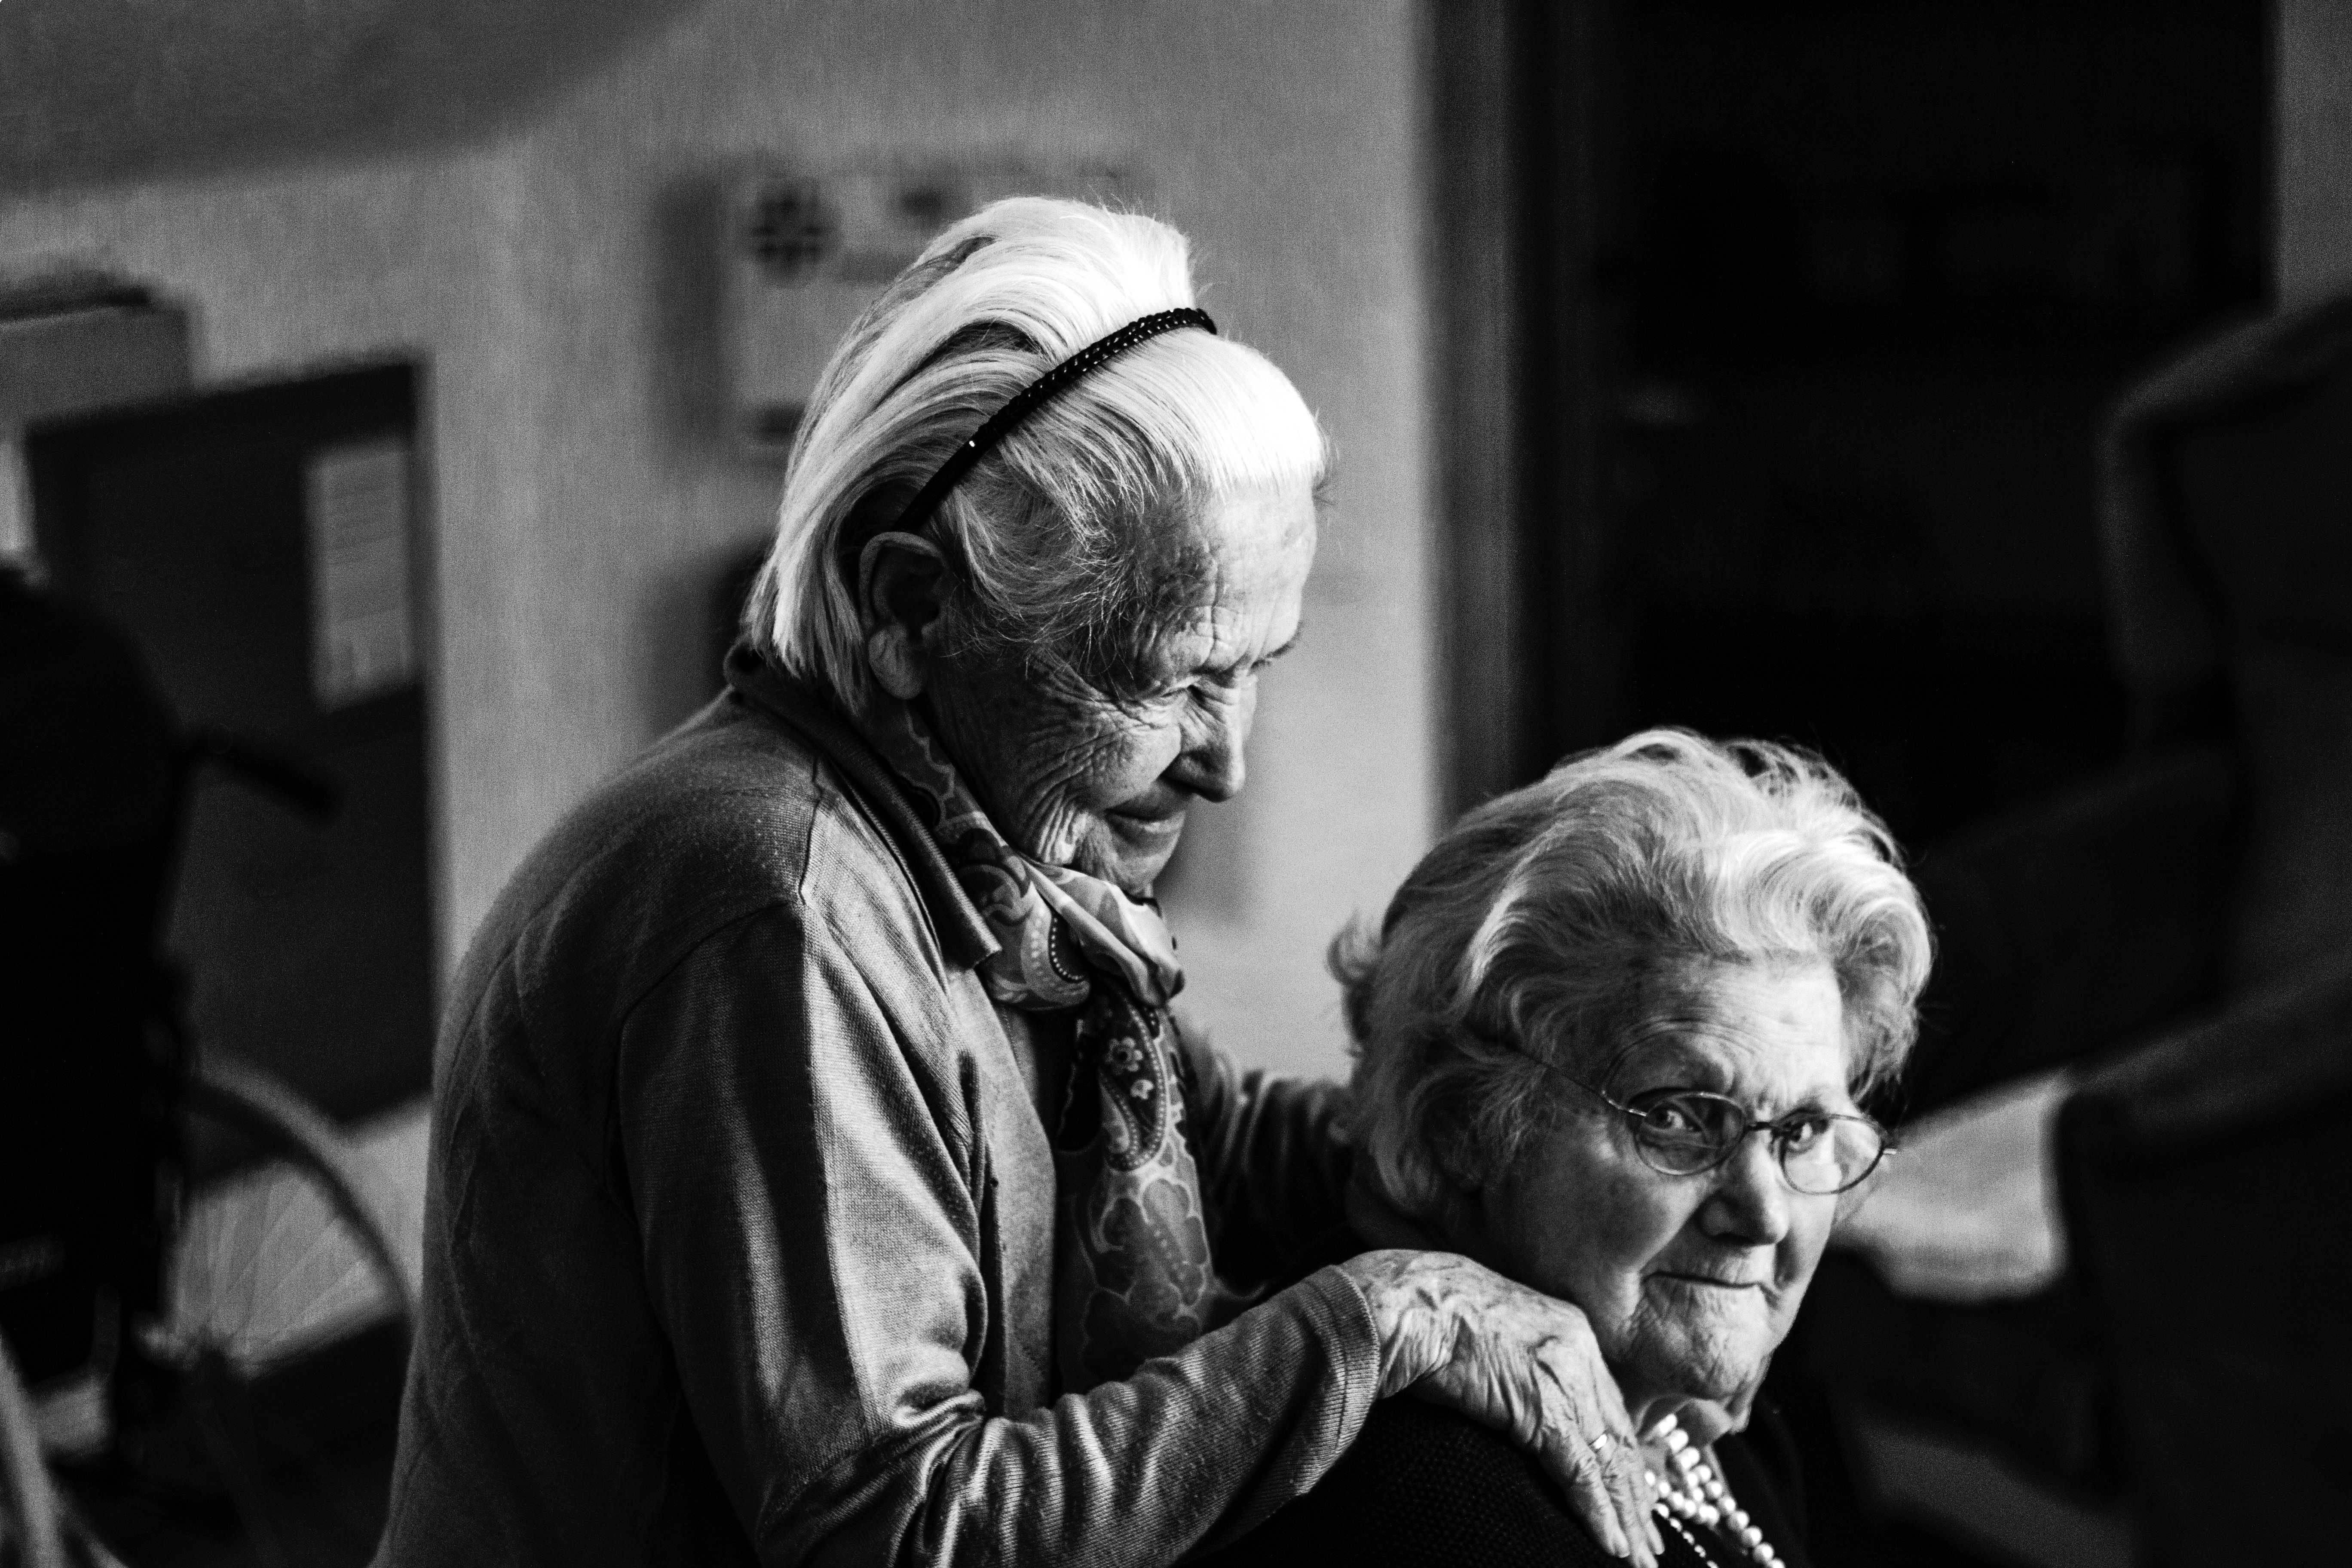 The age and gender dimension of informal caregiving